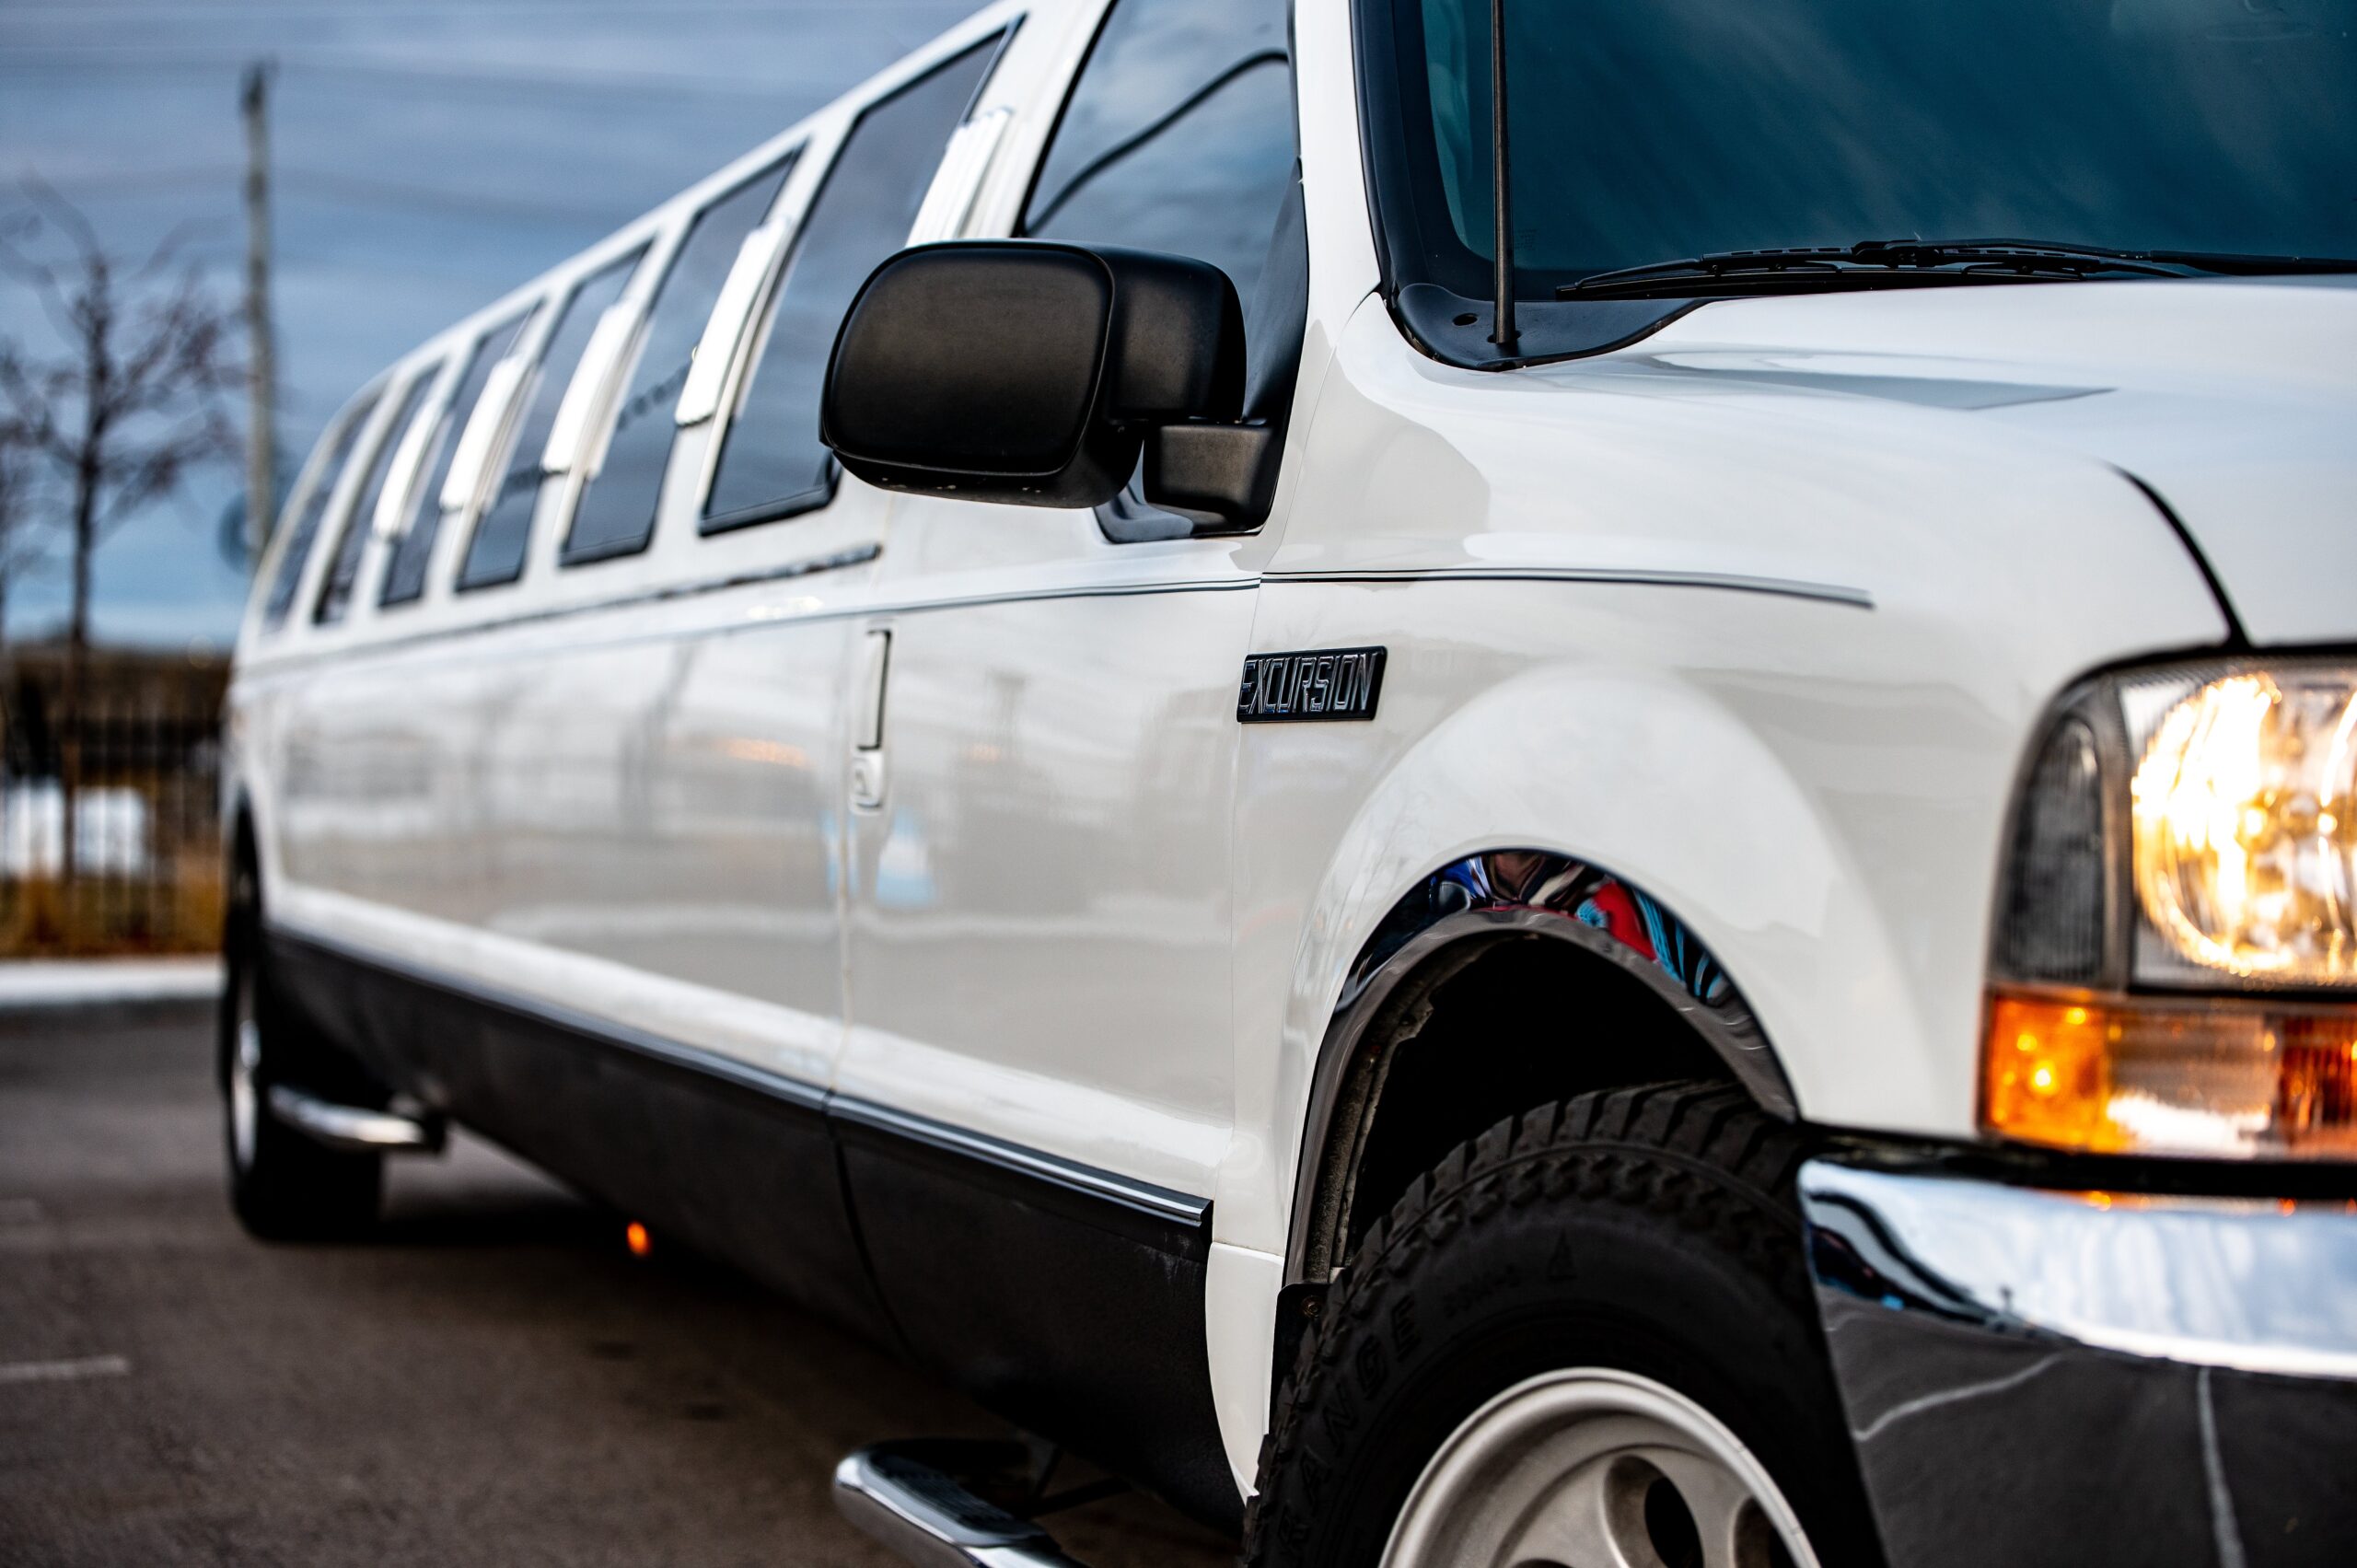 Behind the Scenes: What Goes into Maintaining a Luxury Limousine Fleet